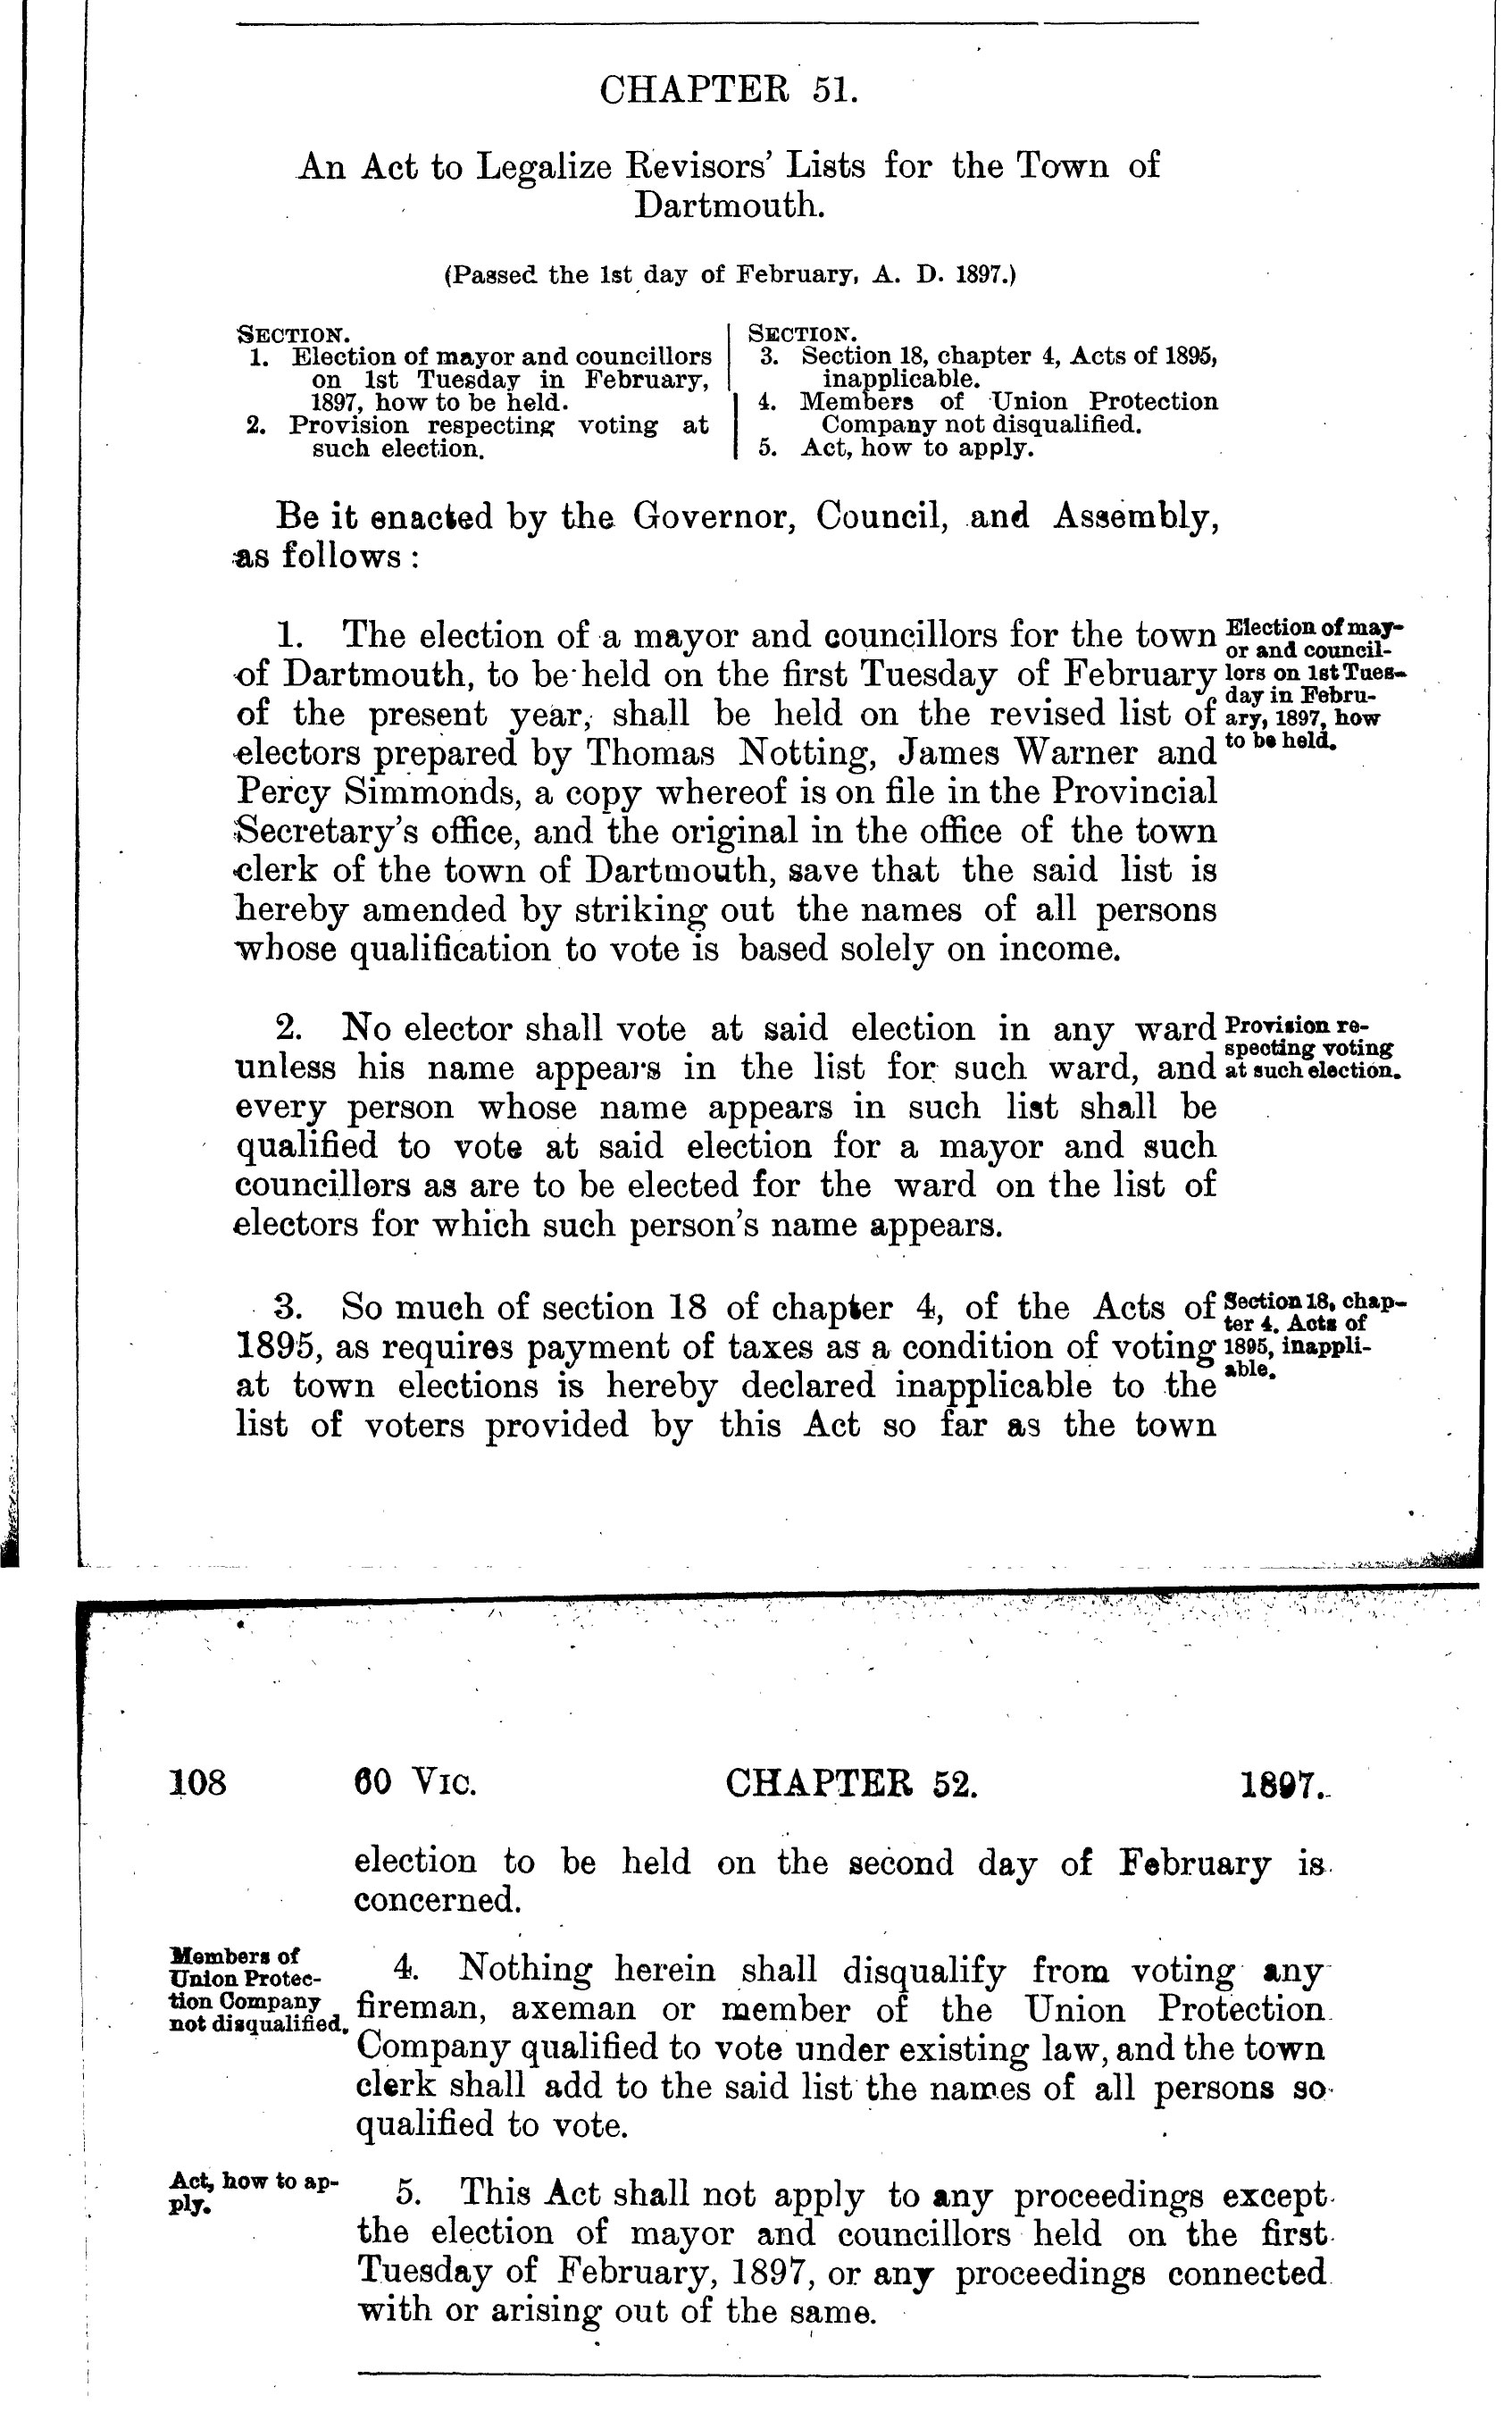 To legalize Revisors' Lists, 1897 c51